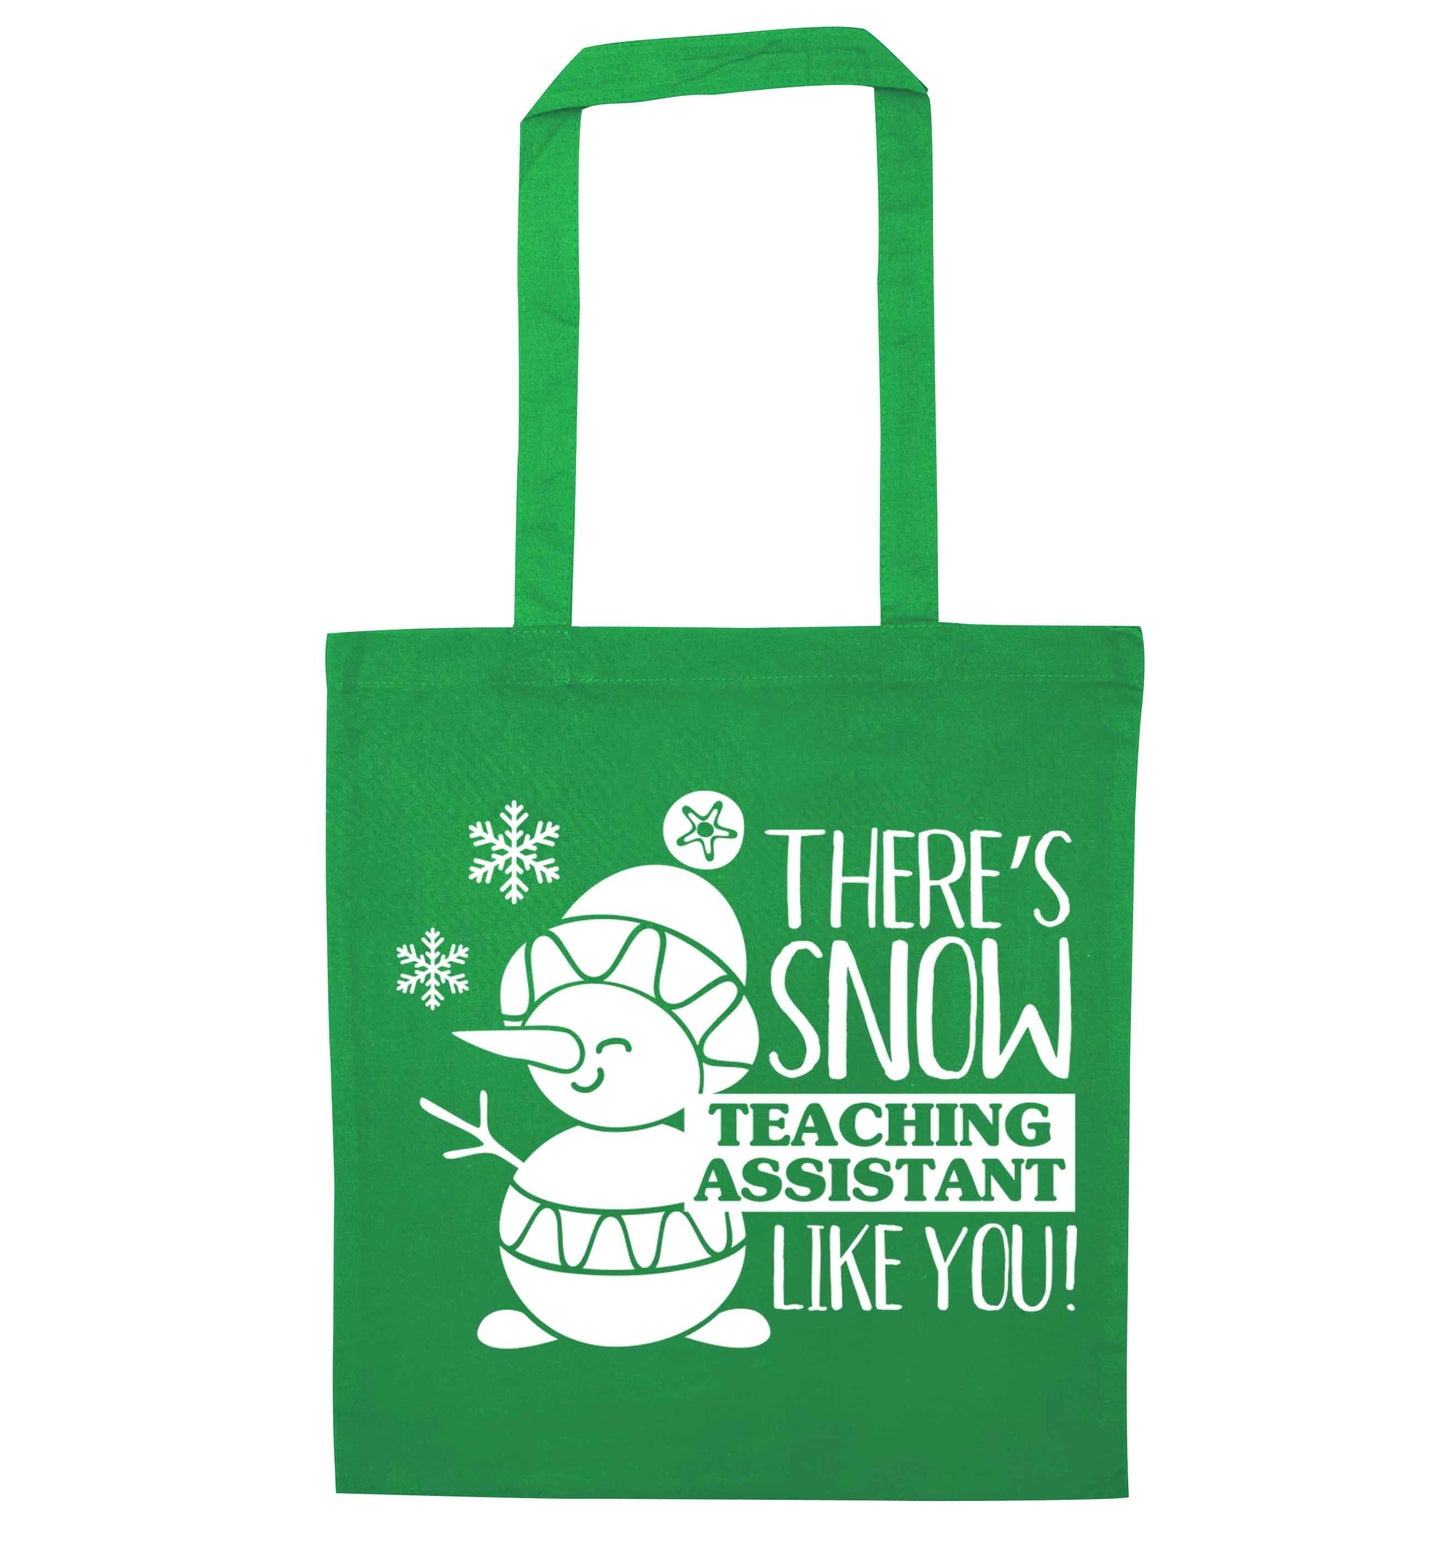 There's snow teaching assistant like you green tote bag